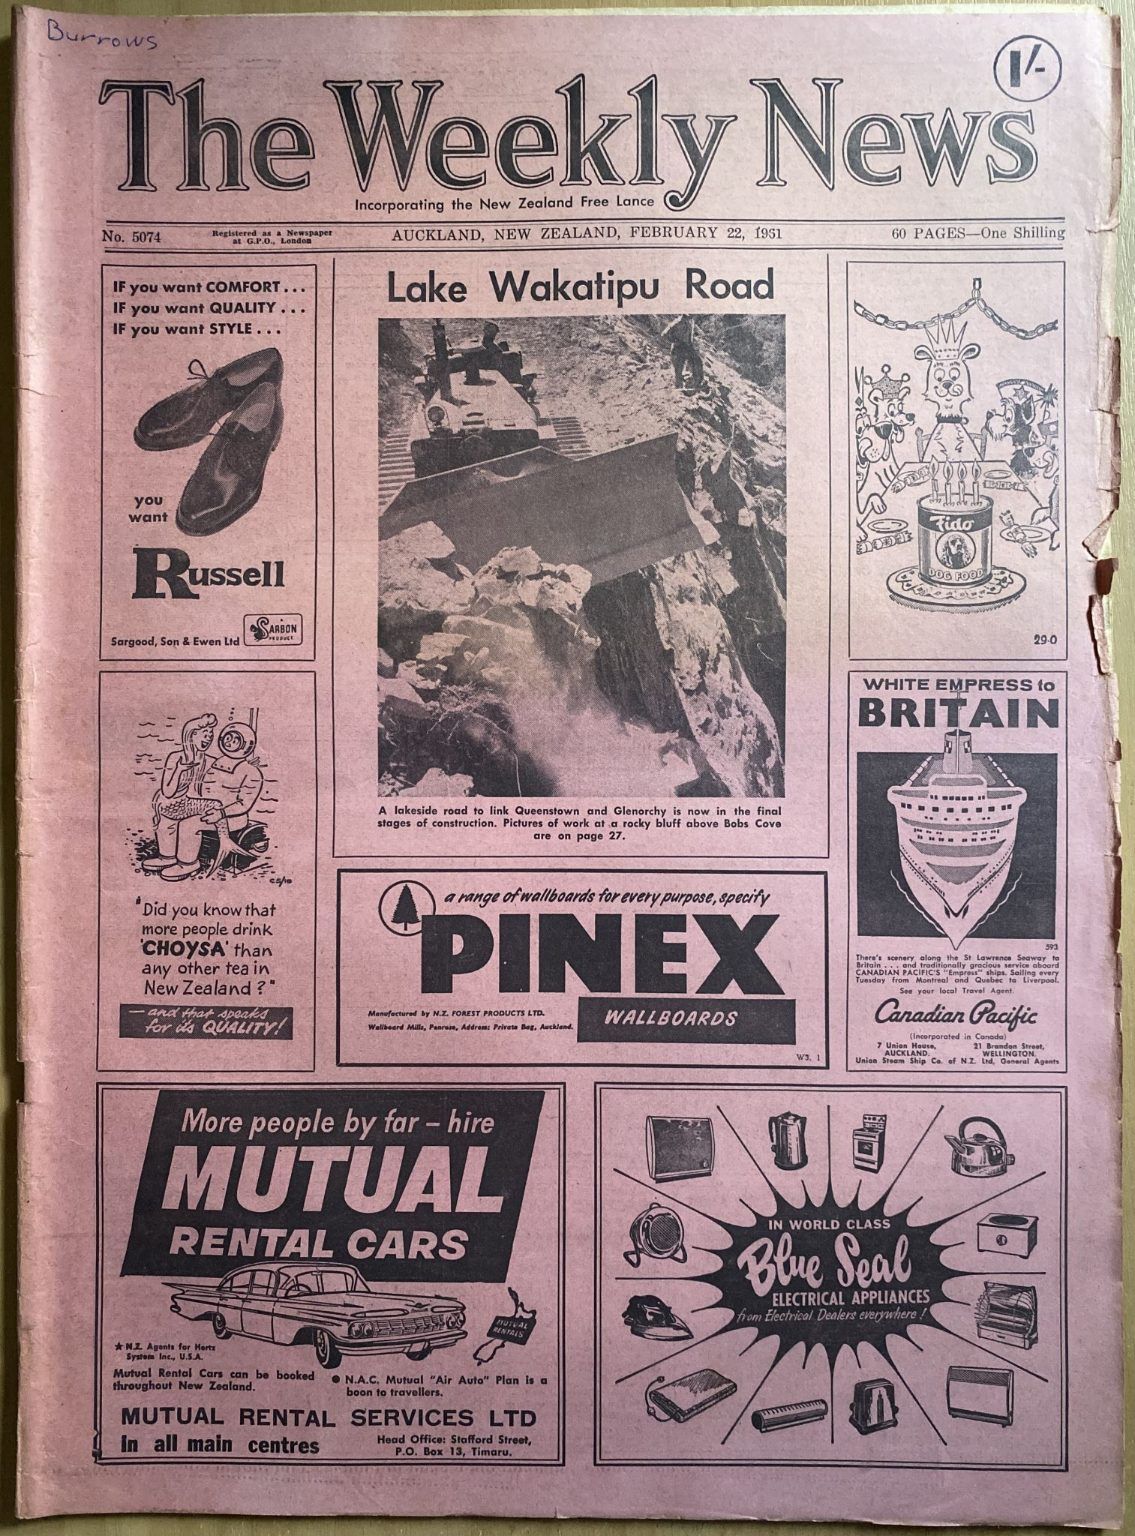 OLD NEWSPAPER: The Weekly News, No. 5074, 22 February 1961